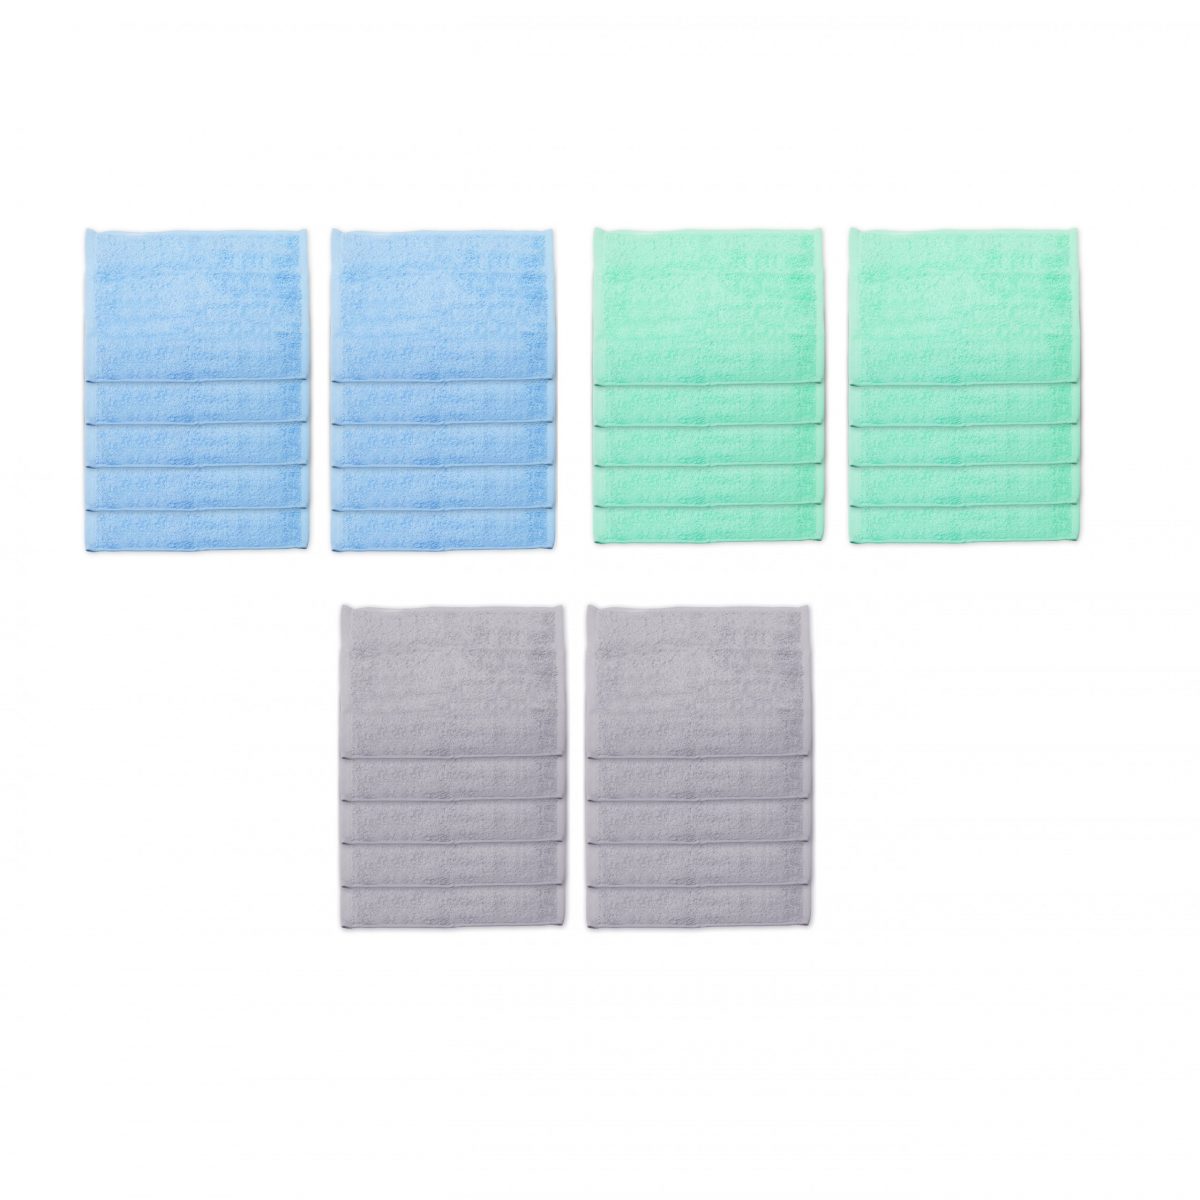 SP Hand Towels (10 Pack)